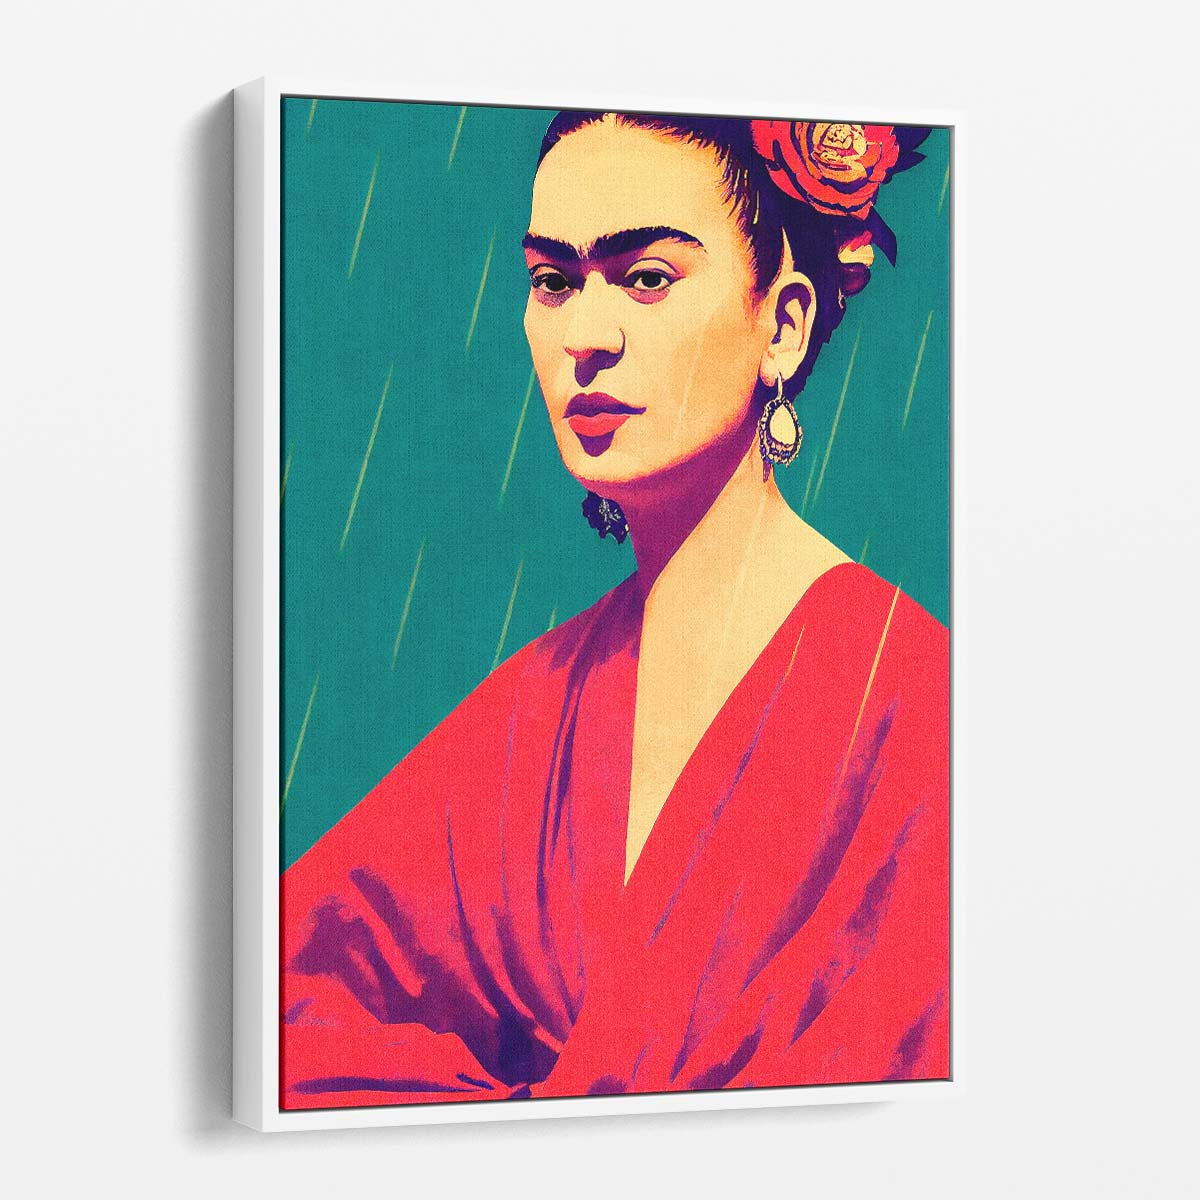 Frida Kahlo Colorful Floral Portrait Illustration by Treechild by Luxuriance Designs, made in USA